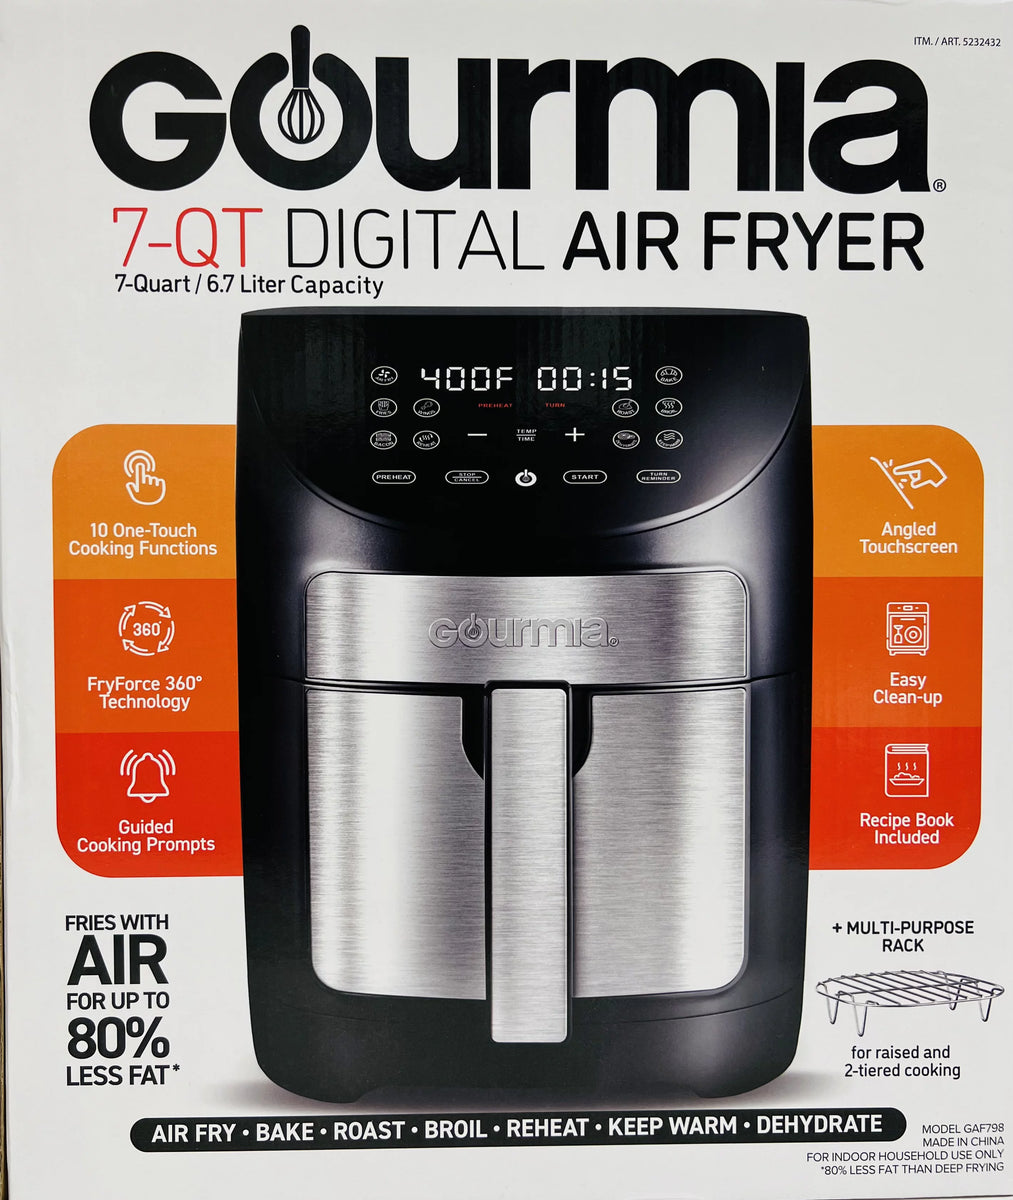 Air Fryers, Gourmia GAF652 Digital Air Fryer - No Oil Healthy Frying - 12  One-Touch Cooking Functions - Guided Cooking Prompts - Easy Clean-Up -  6-Quart Basket - Recipe Book Included